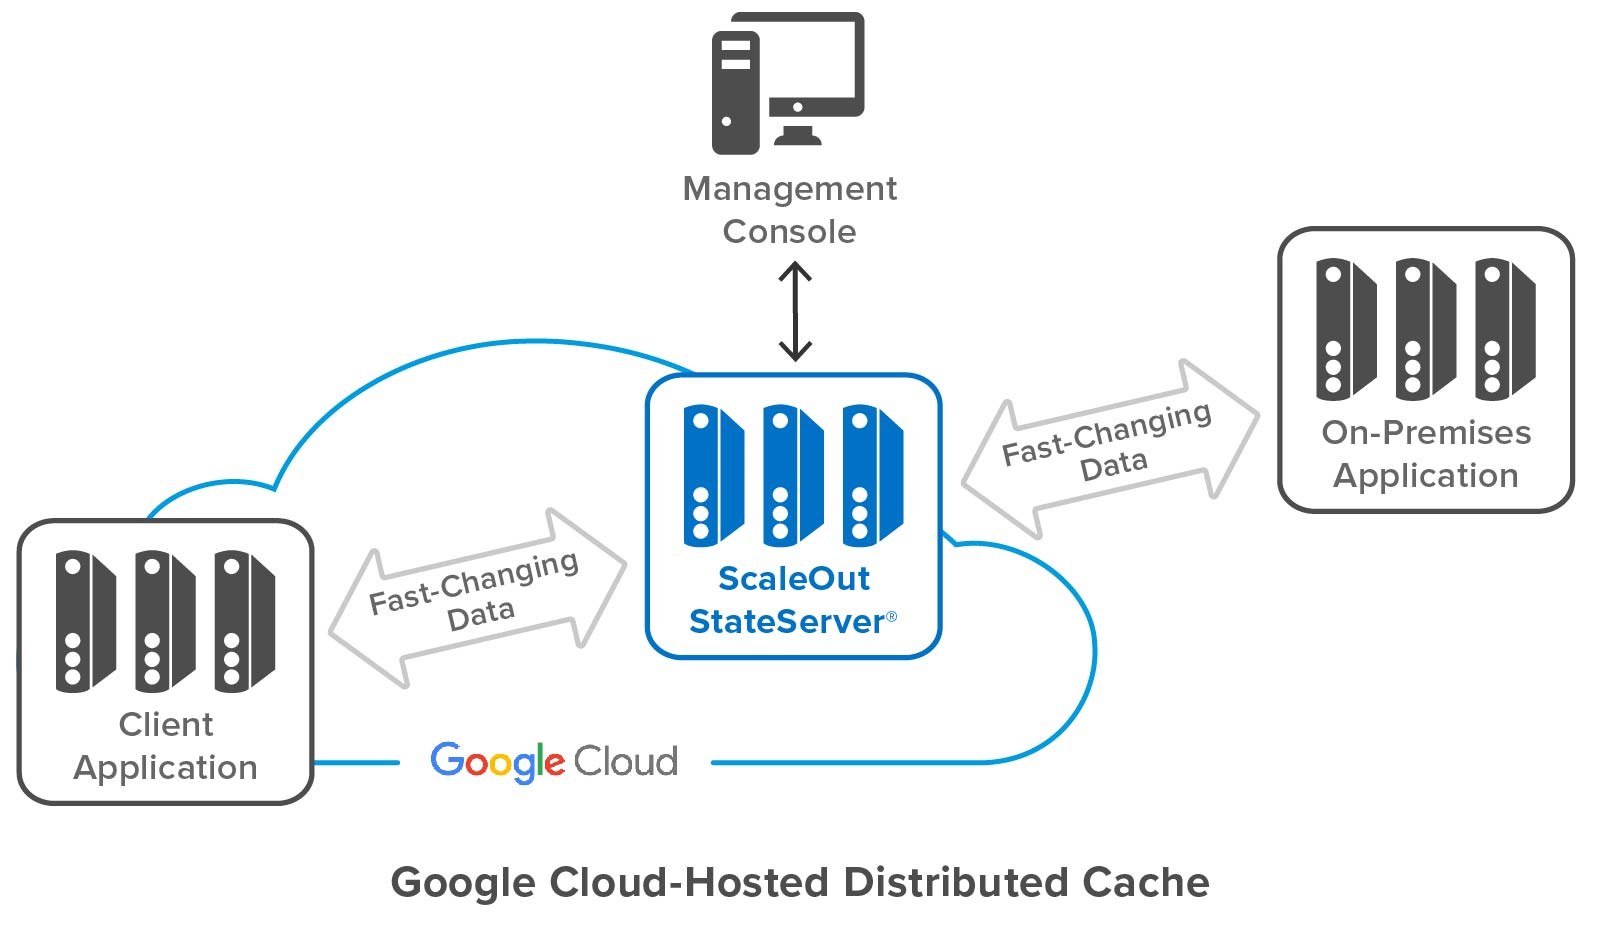 Diagram shows both cloud-hosted and on-premises client applications seamlessly accessing ScaleOut StateServer in Google Cloud.